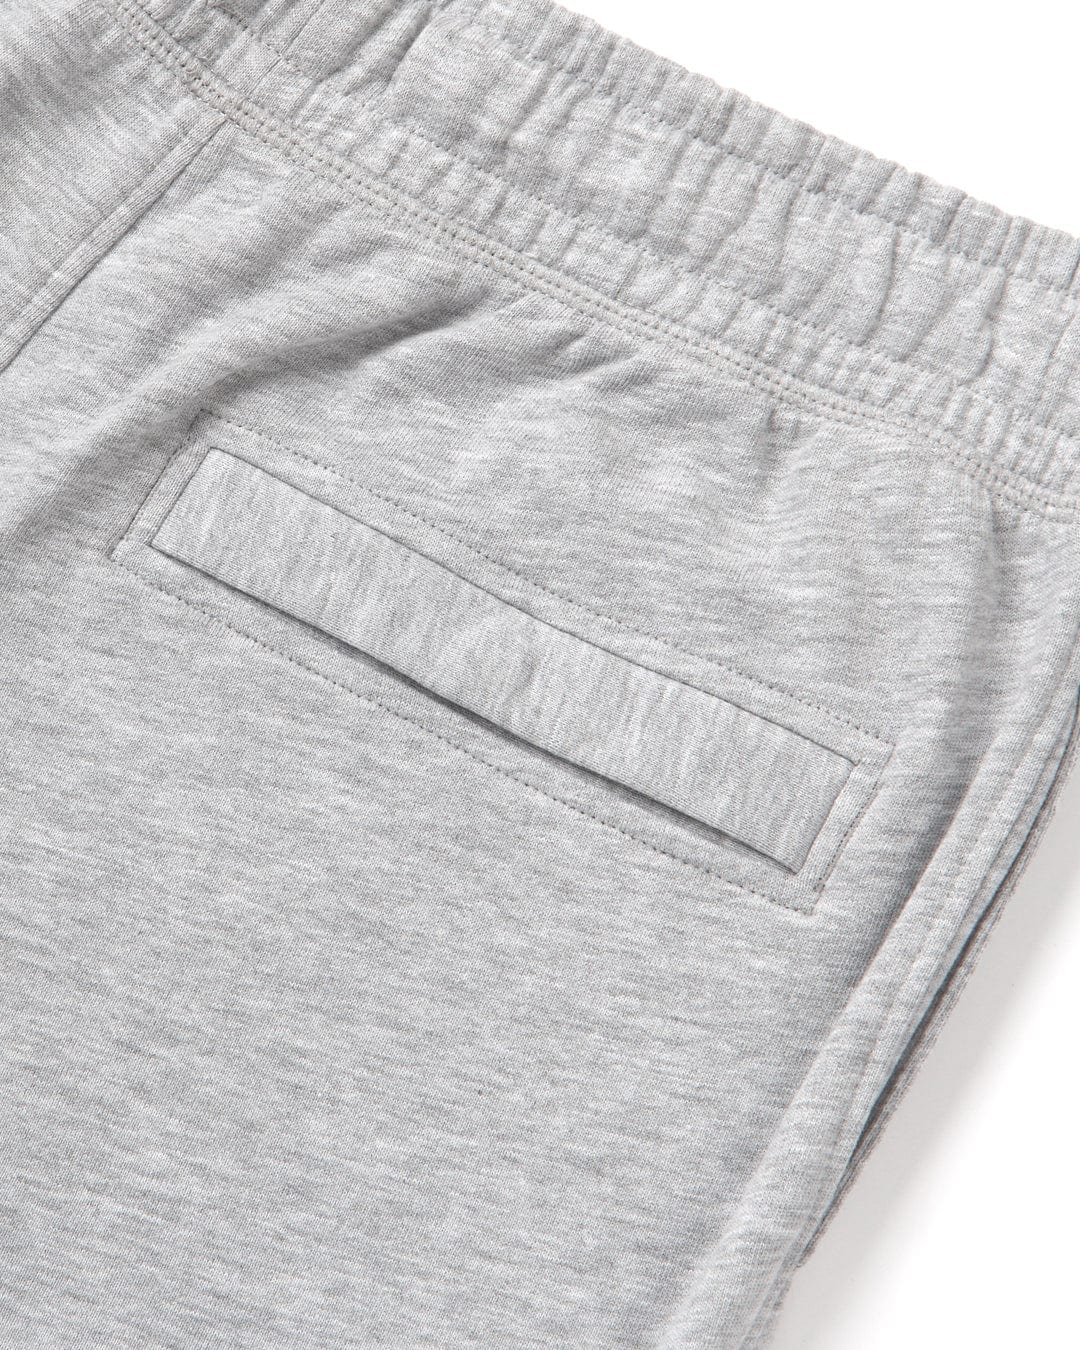 A pair of Saltrock Original - Mens Shorts - Grey crafted from soft jersey material, with a pocket on the side and an elasticated waist.